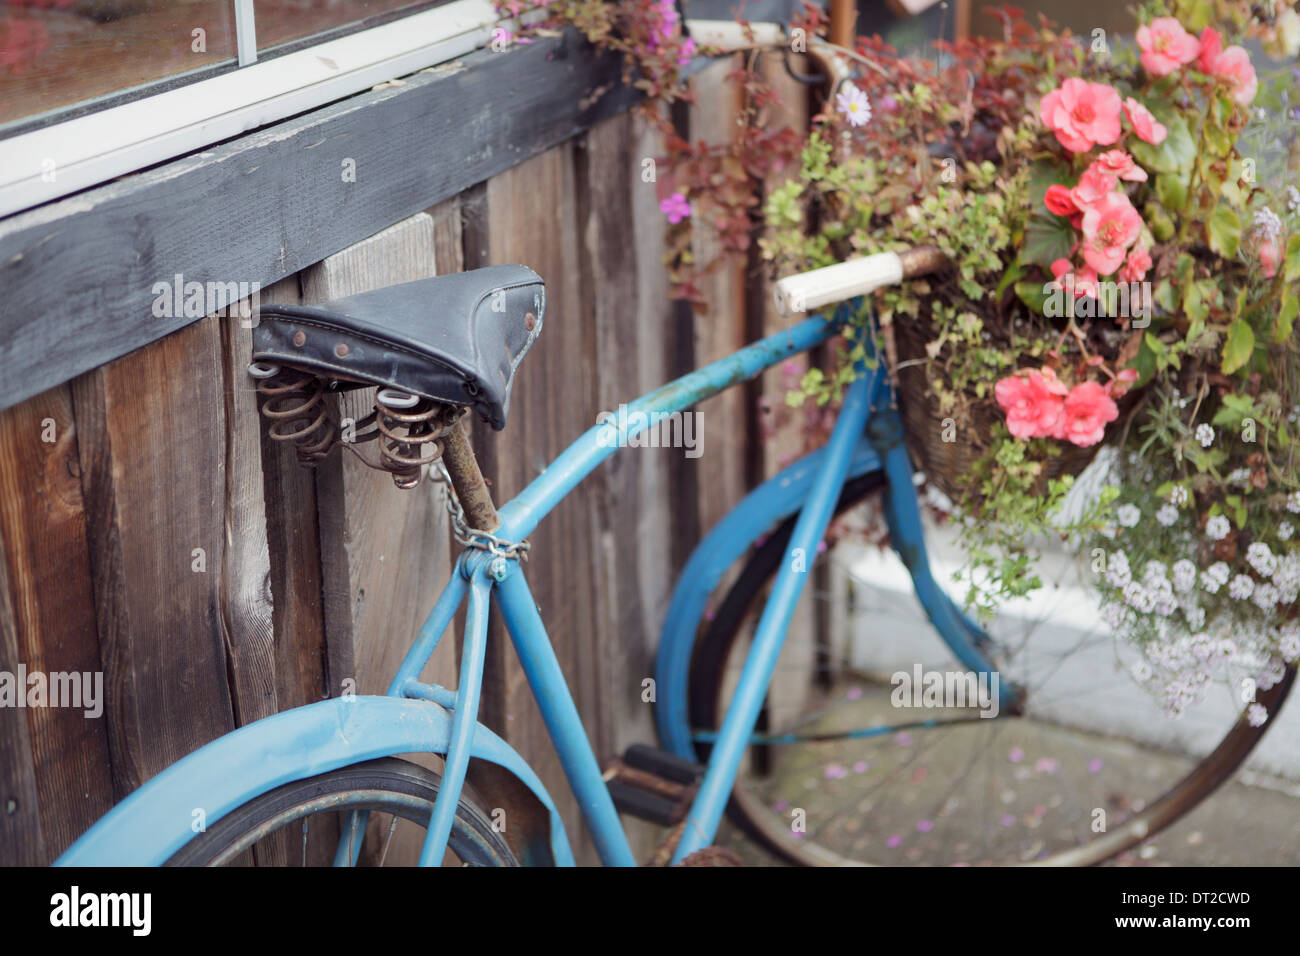 An antique bike with a basket full of flowers Stock Photo